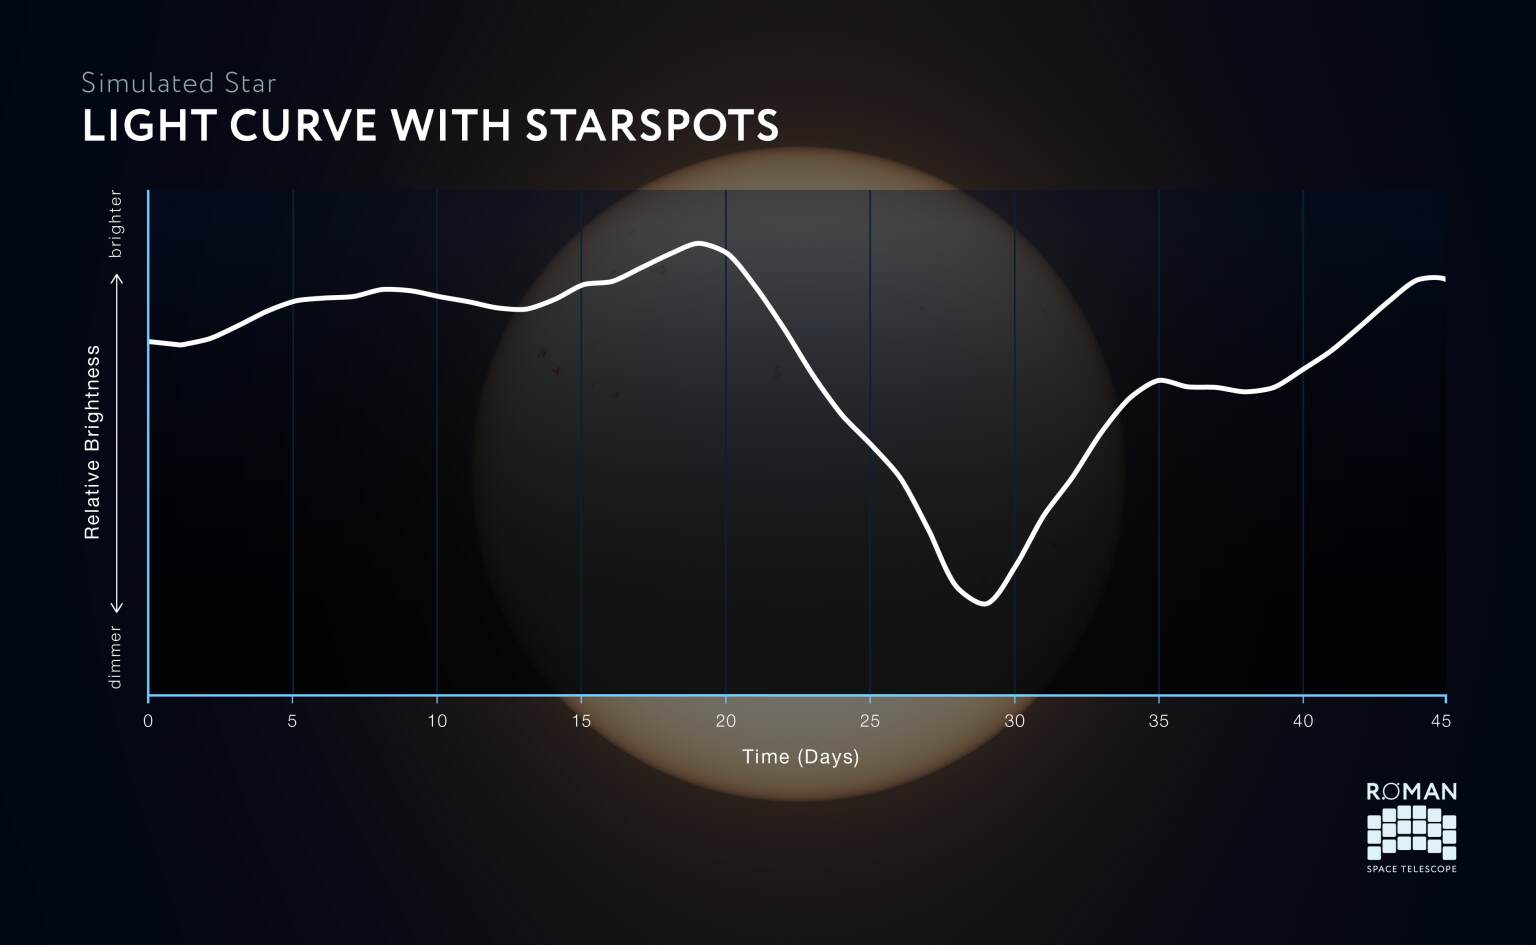 Stars can have numerous spots spread throughout their surface, causing irregular fluctuations in brightness that make it difficult to identify periodic signals of dimming due to the star's rotation. The graph generated by the Butterpy program demonstrates how the observed brightness of a simulated star changes over a single rotation period. NASA's Roman Space Telescope will measure the light curves and therefore rotation rates of hundreds of thousands of stars, providing new insights into the stellar populations in our galaxy. Credit: NASA, Ralf Crawford (STScI)